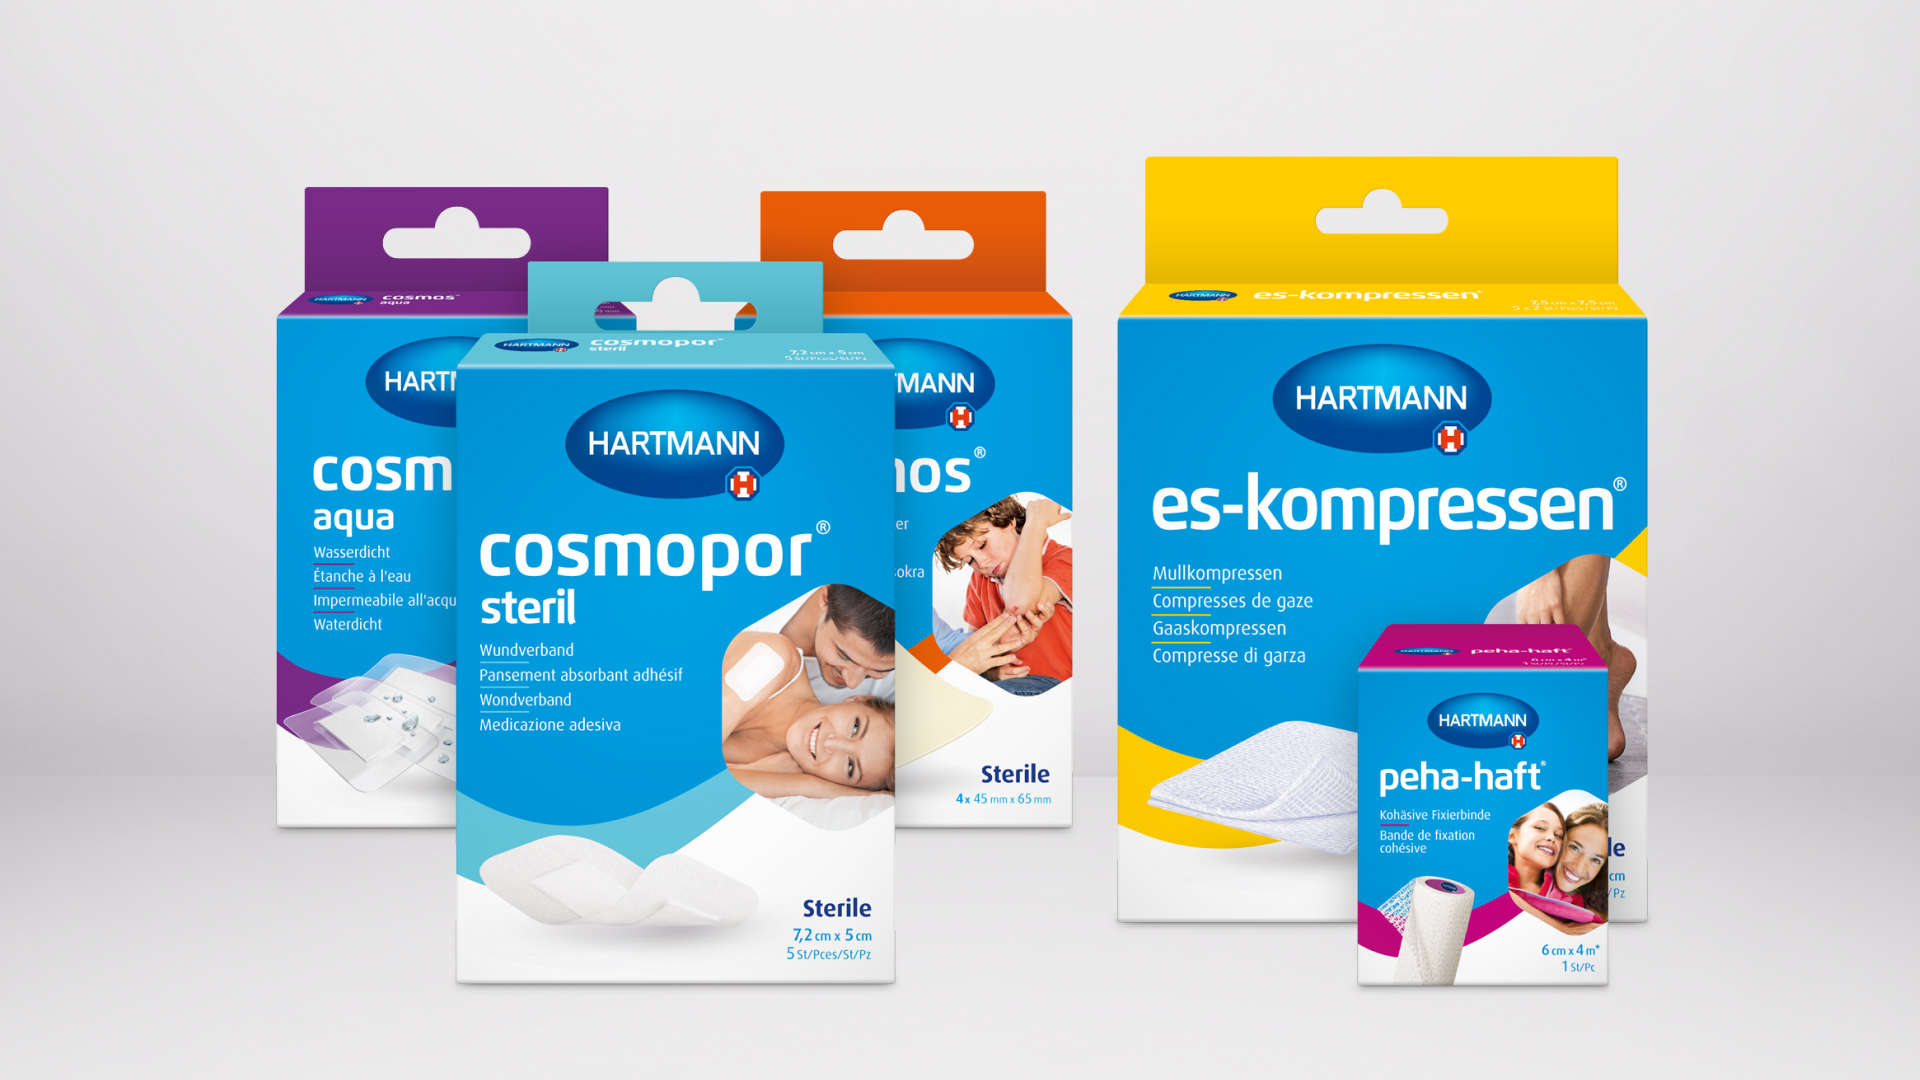 Various HARTMANN products for wound care lined up next to each other.